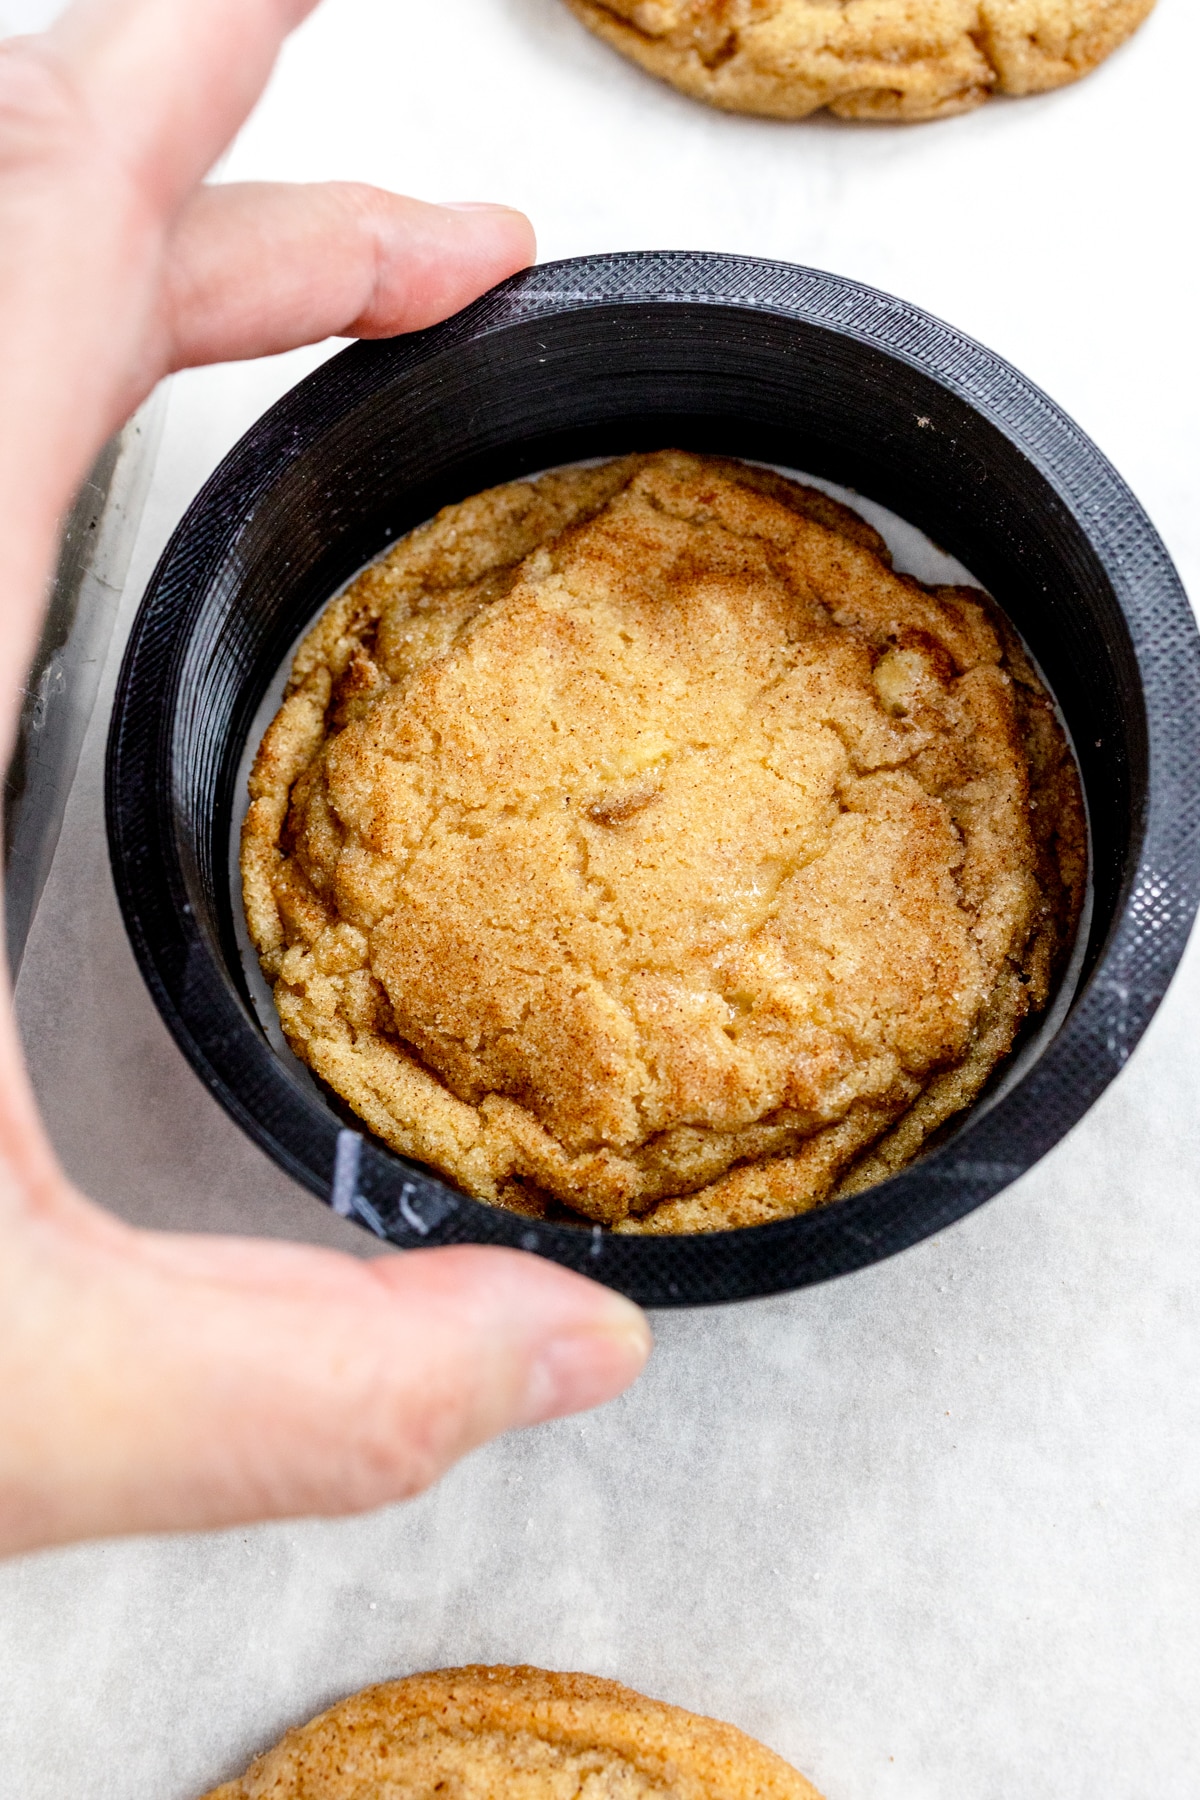 Top view of a freshly baked Caramel Apple Cookie with a large cookie cutter being placed around it to make it into a perfect circle.